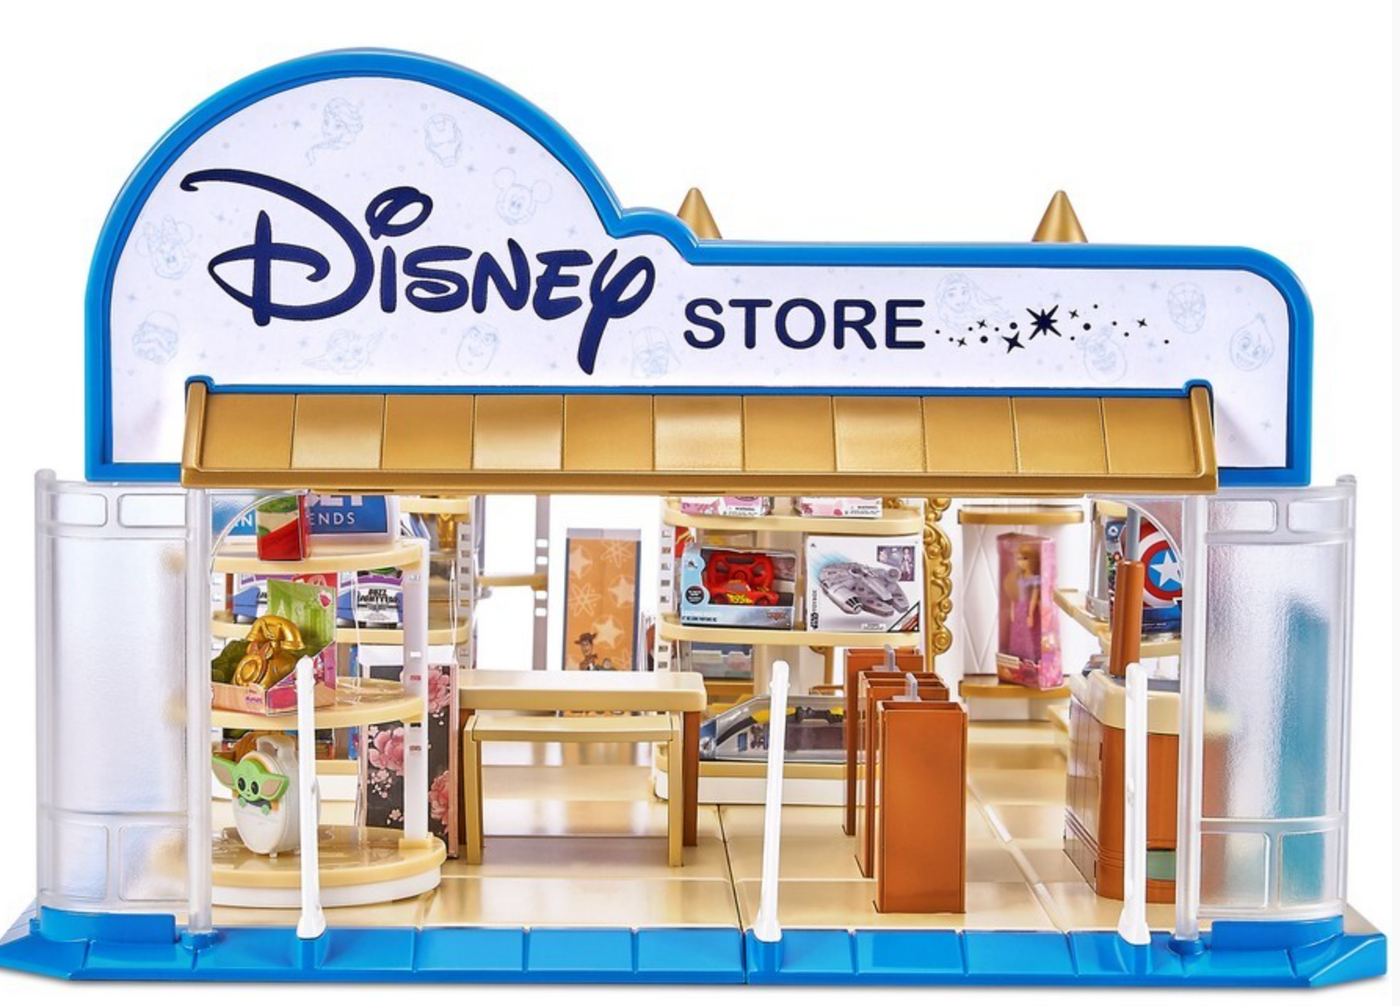 Mini Brands 5 Surprise Disney Store Playset with 2 Exclusive Minis by Zuru New